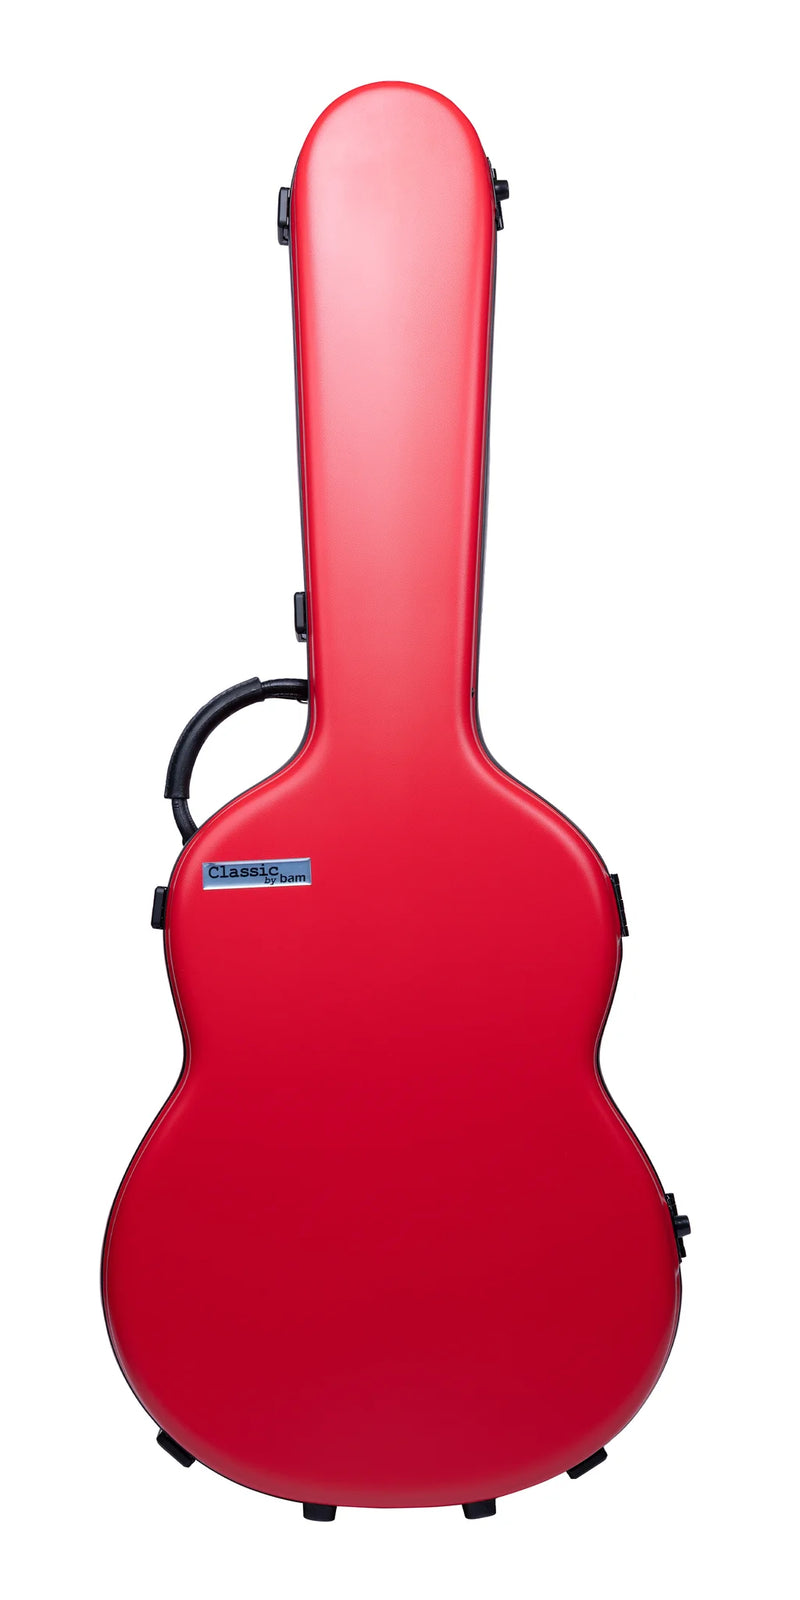 Bam 8002SRG Classic Classical Guitar ABS Case (Pomegranate Red)